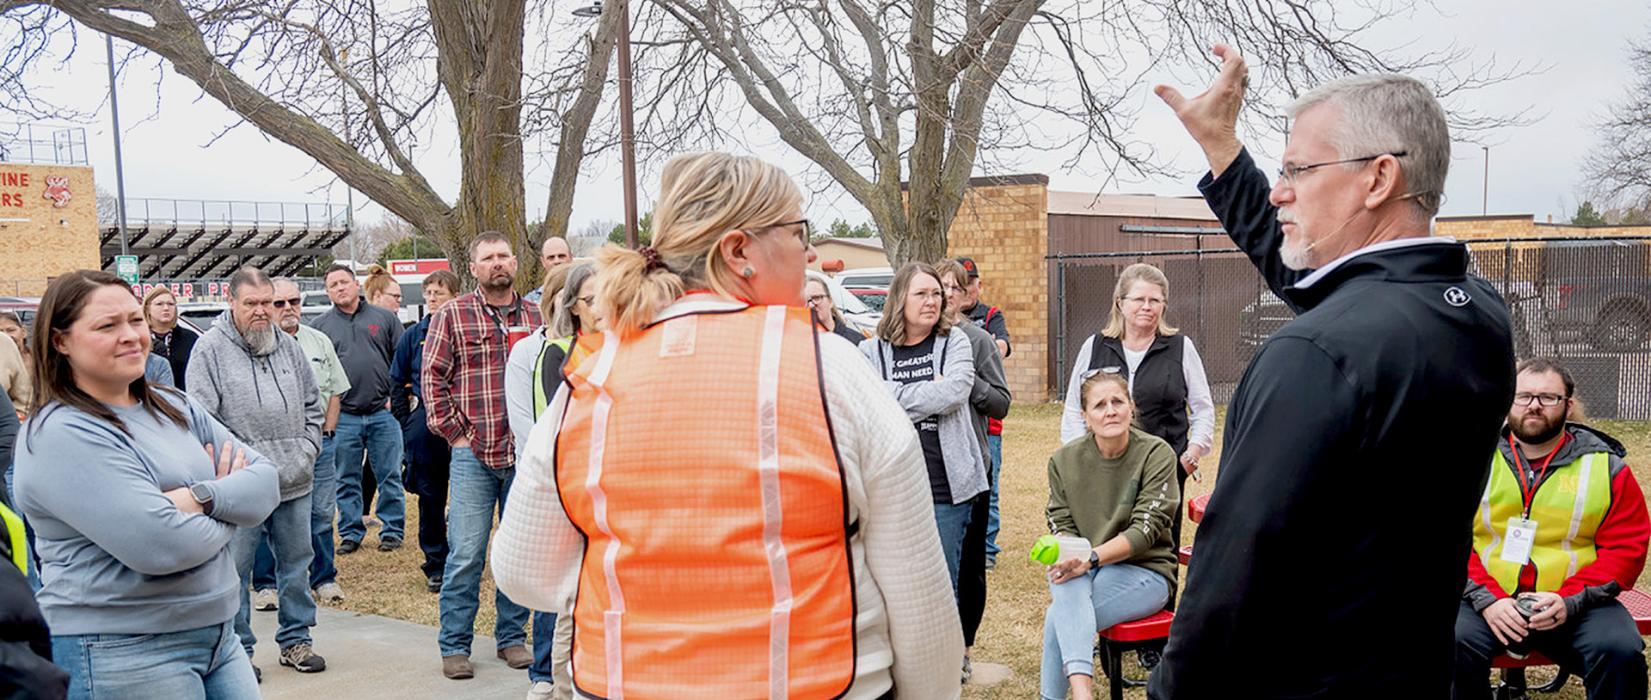 After going through the live reunified training, faculty and trainers visited outside to share their findings and thoughts. Photo by Laura Vroman